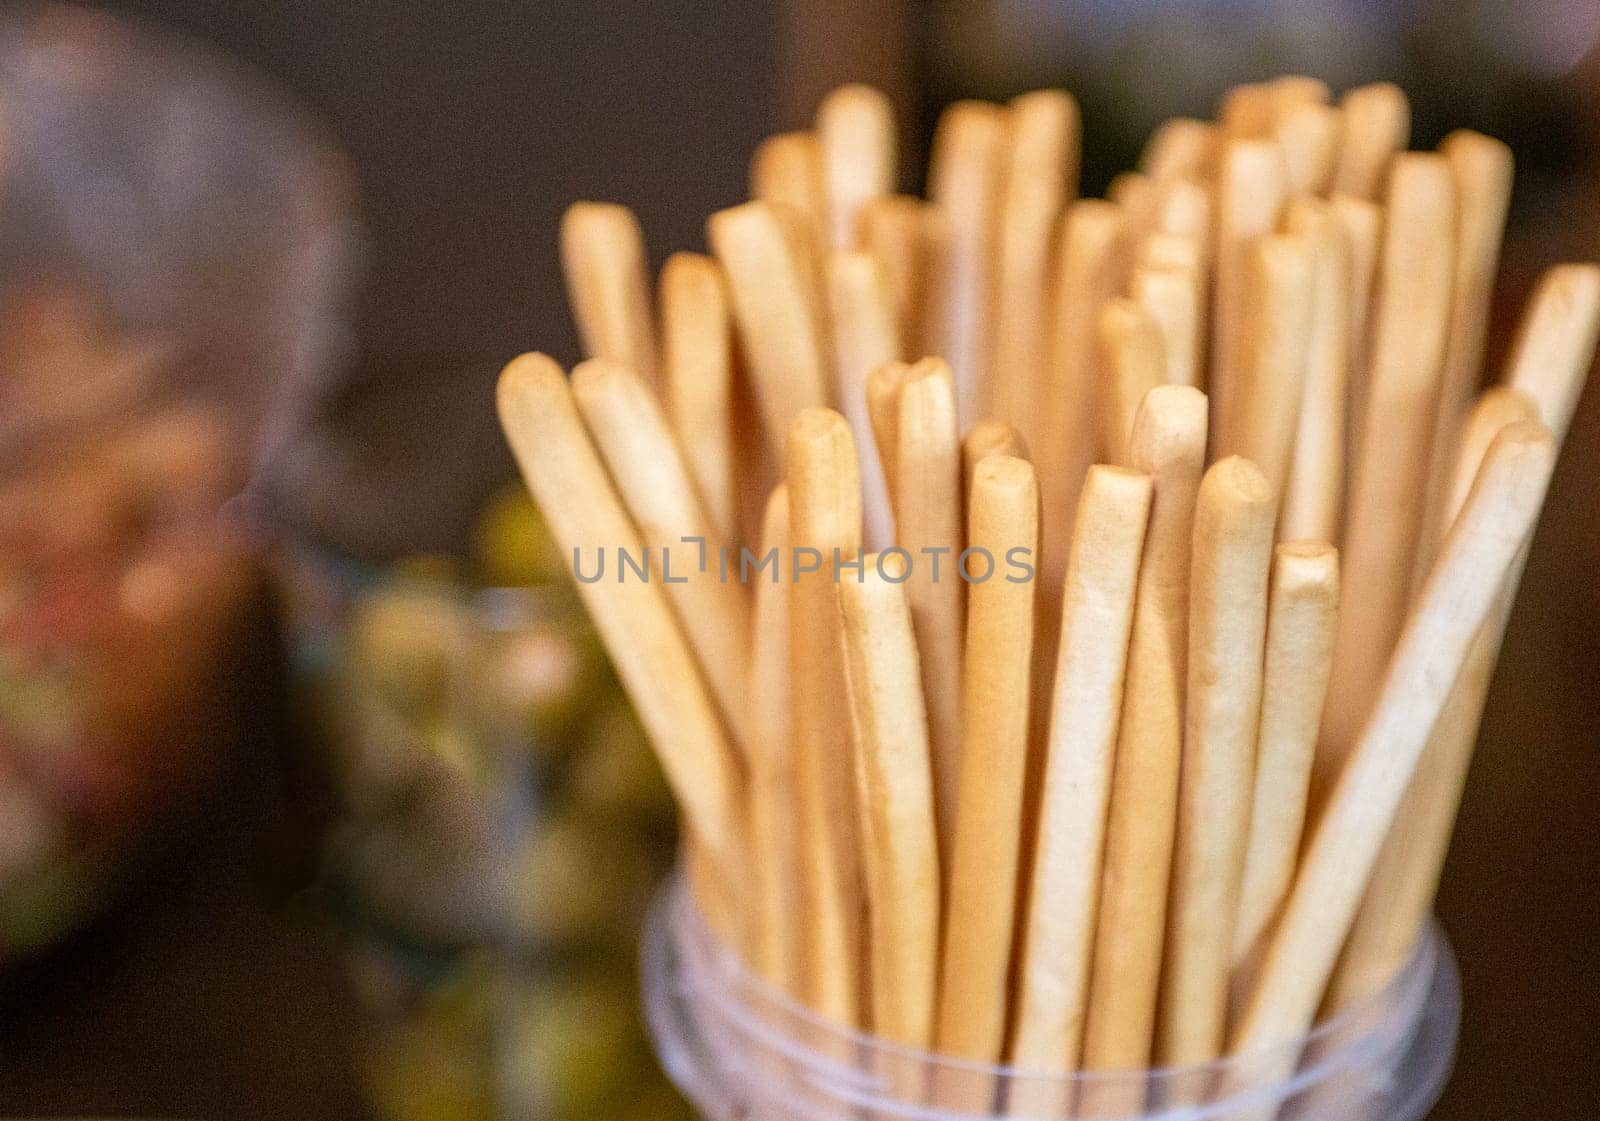 Plain Bread Sticks for Dipping by TopCreativePhotography